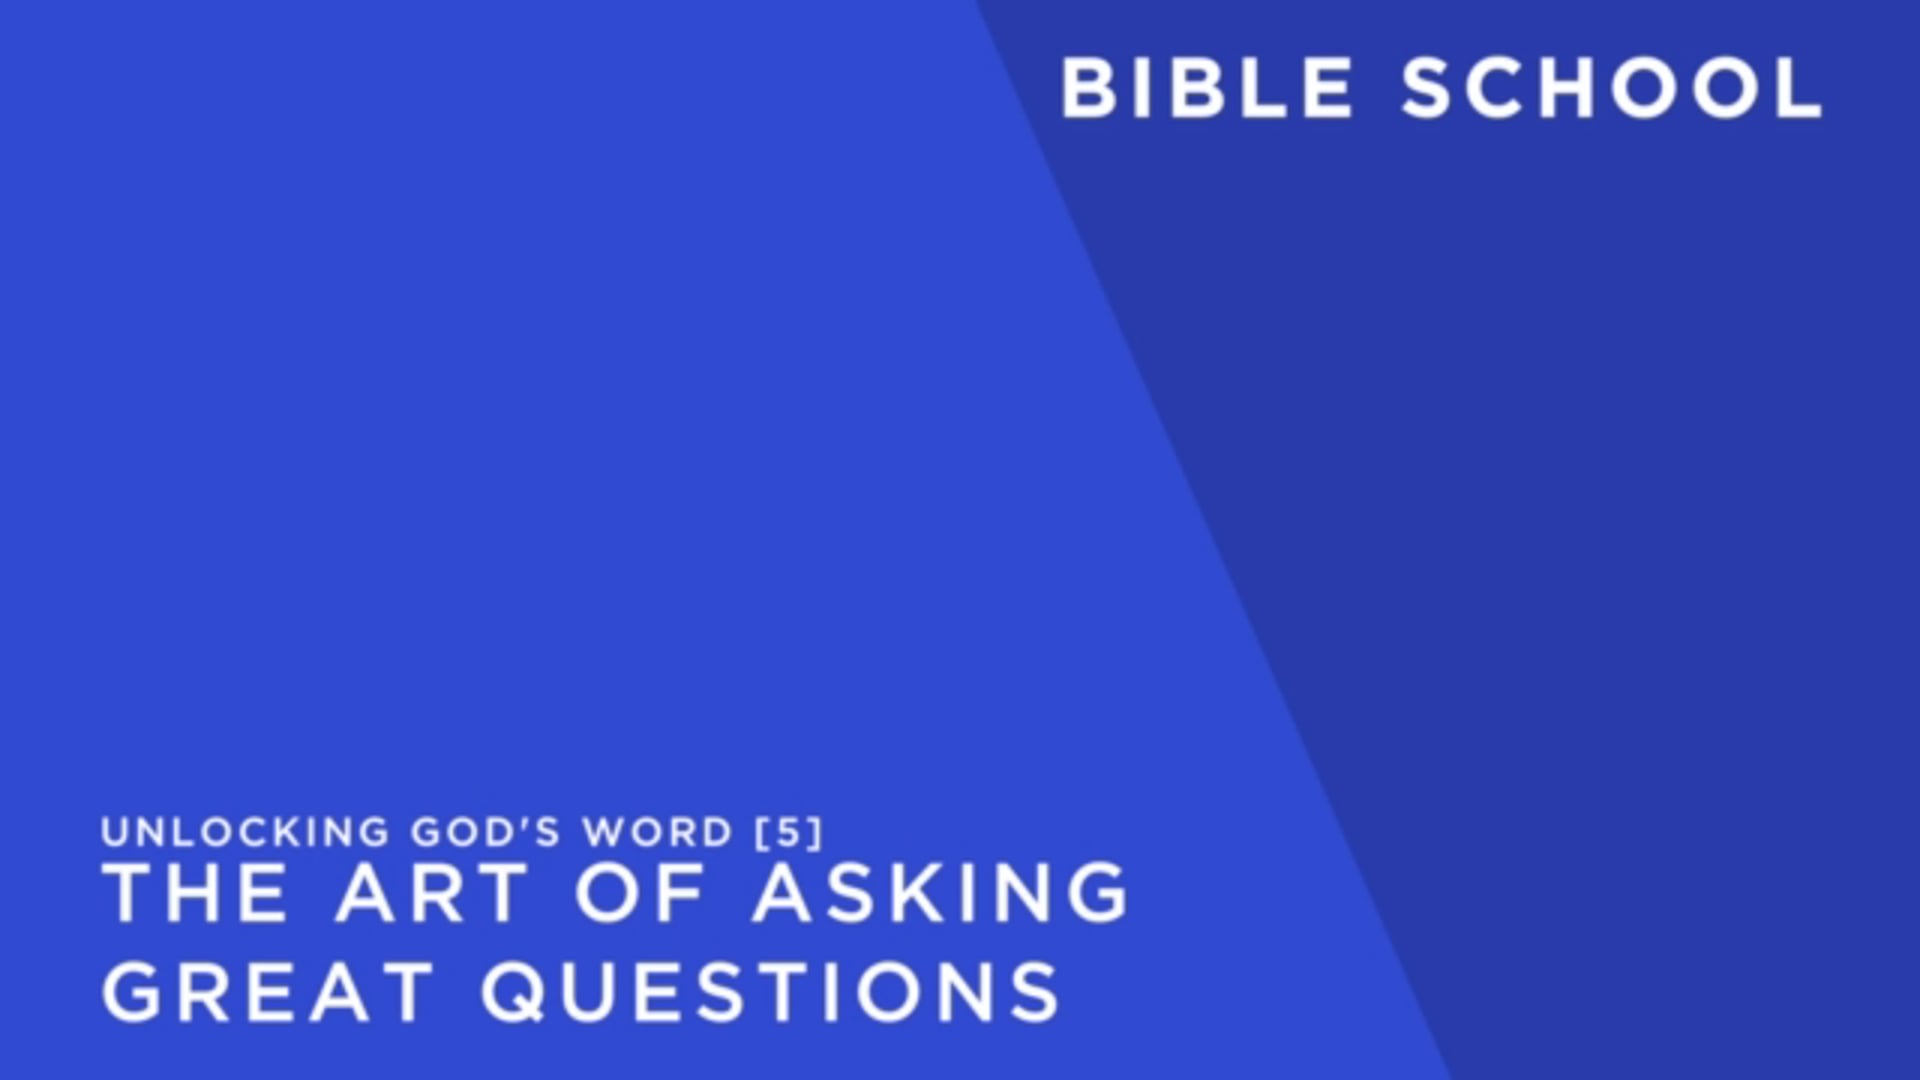 UNLOCKING GOD'S WORD 5 The Art of Asking Great Questions